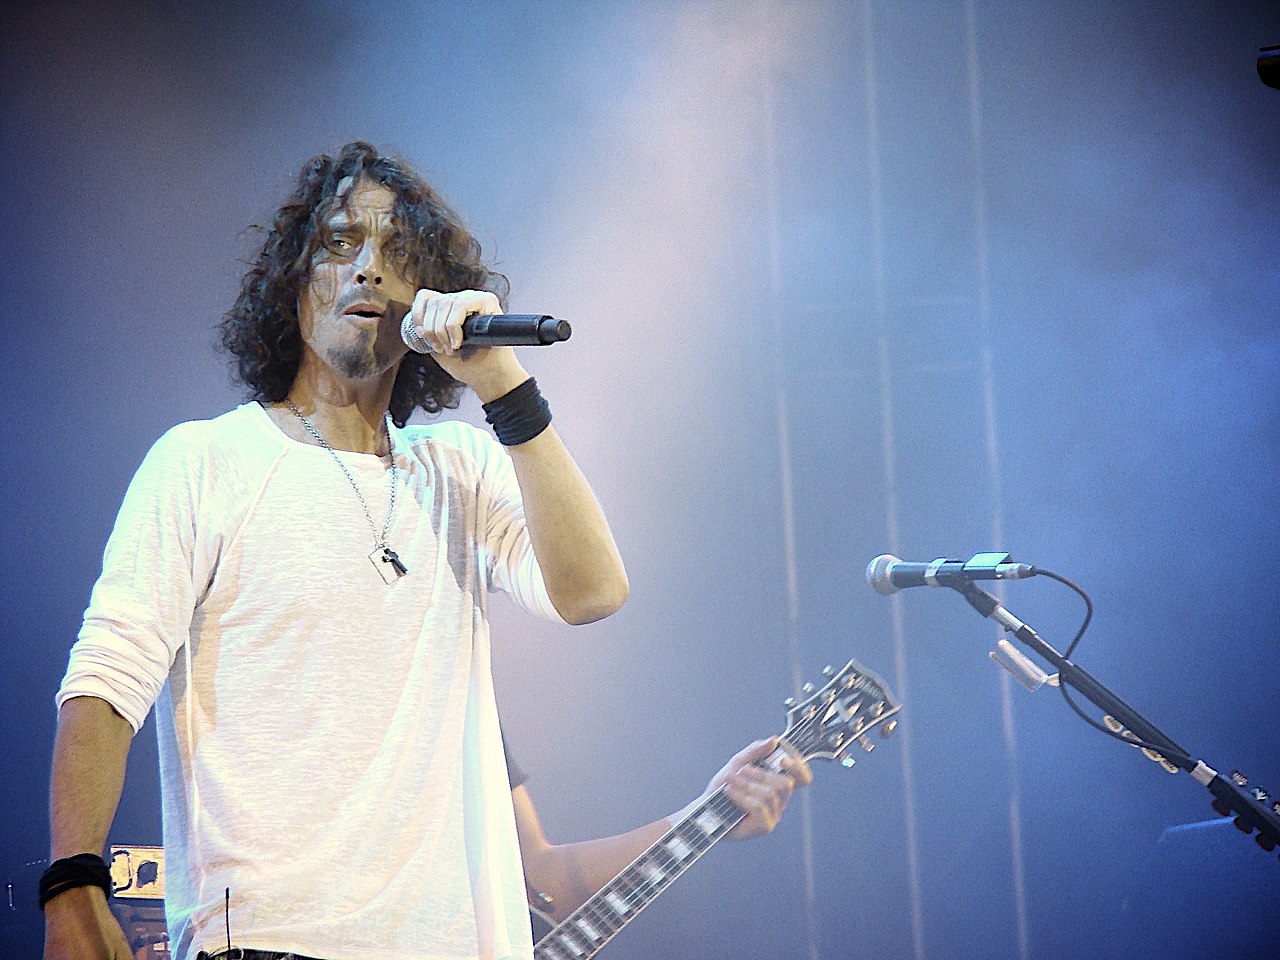 chris cornell - Andreas Eldh - Chris Cornell, CC BY 2.0, https://commons.wikimedia.org/w/index.php?curid=61741680